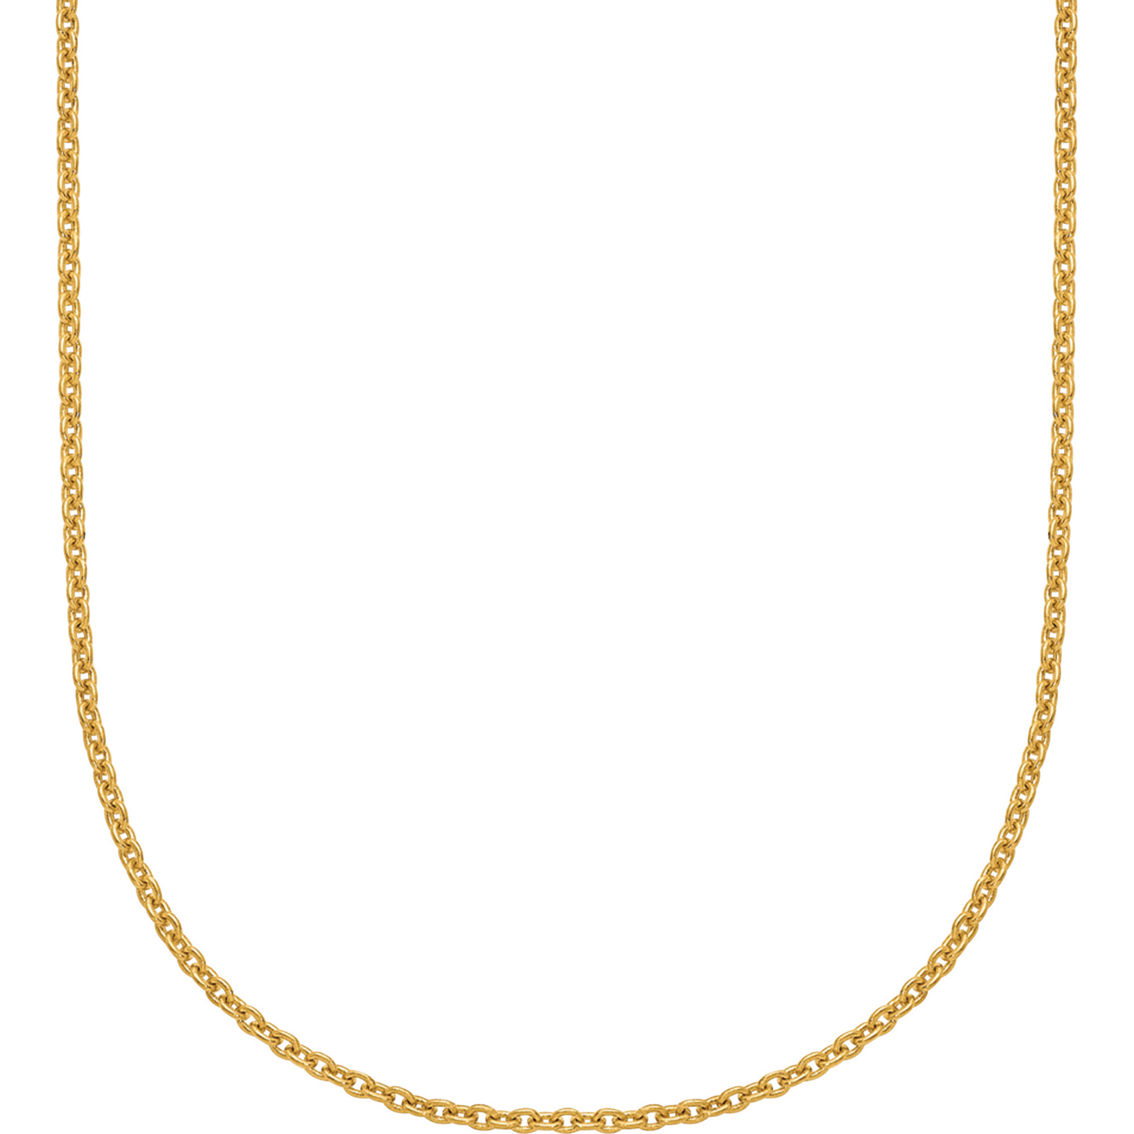 24K Pure Gold 24K Yellow Gold 1.3mm Solid Cable 18 in. Chain - Image 3 of 5